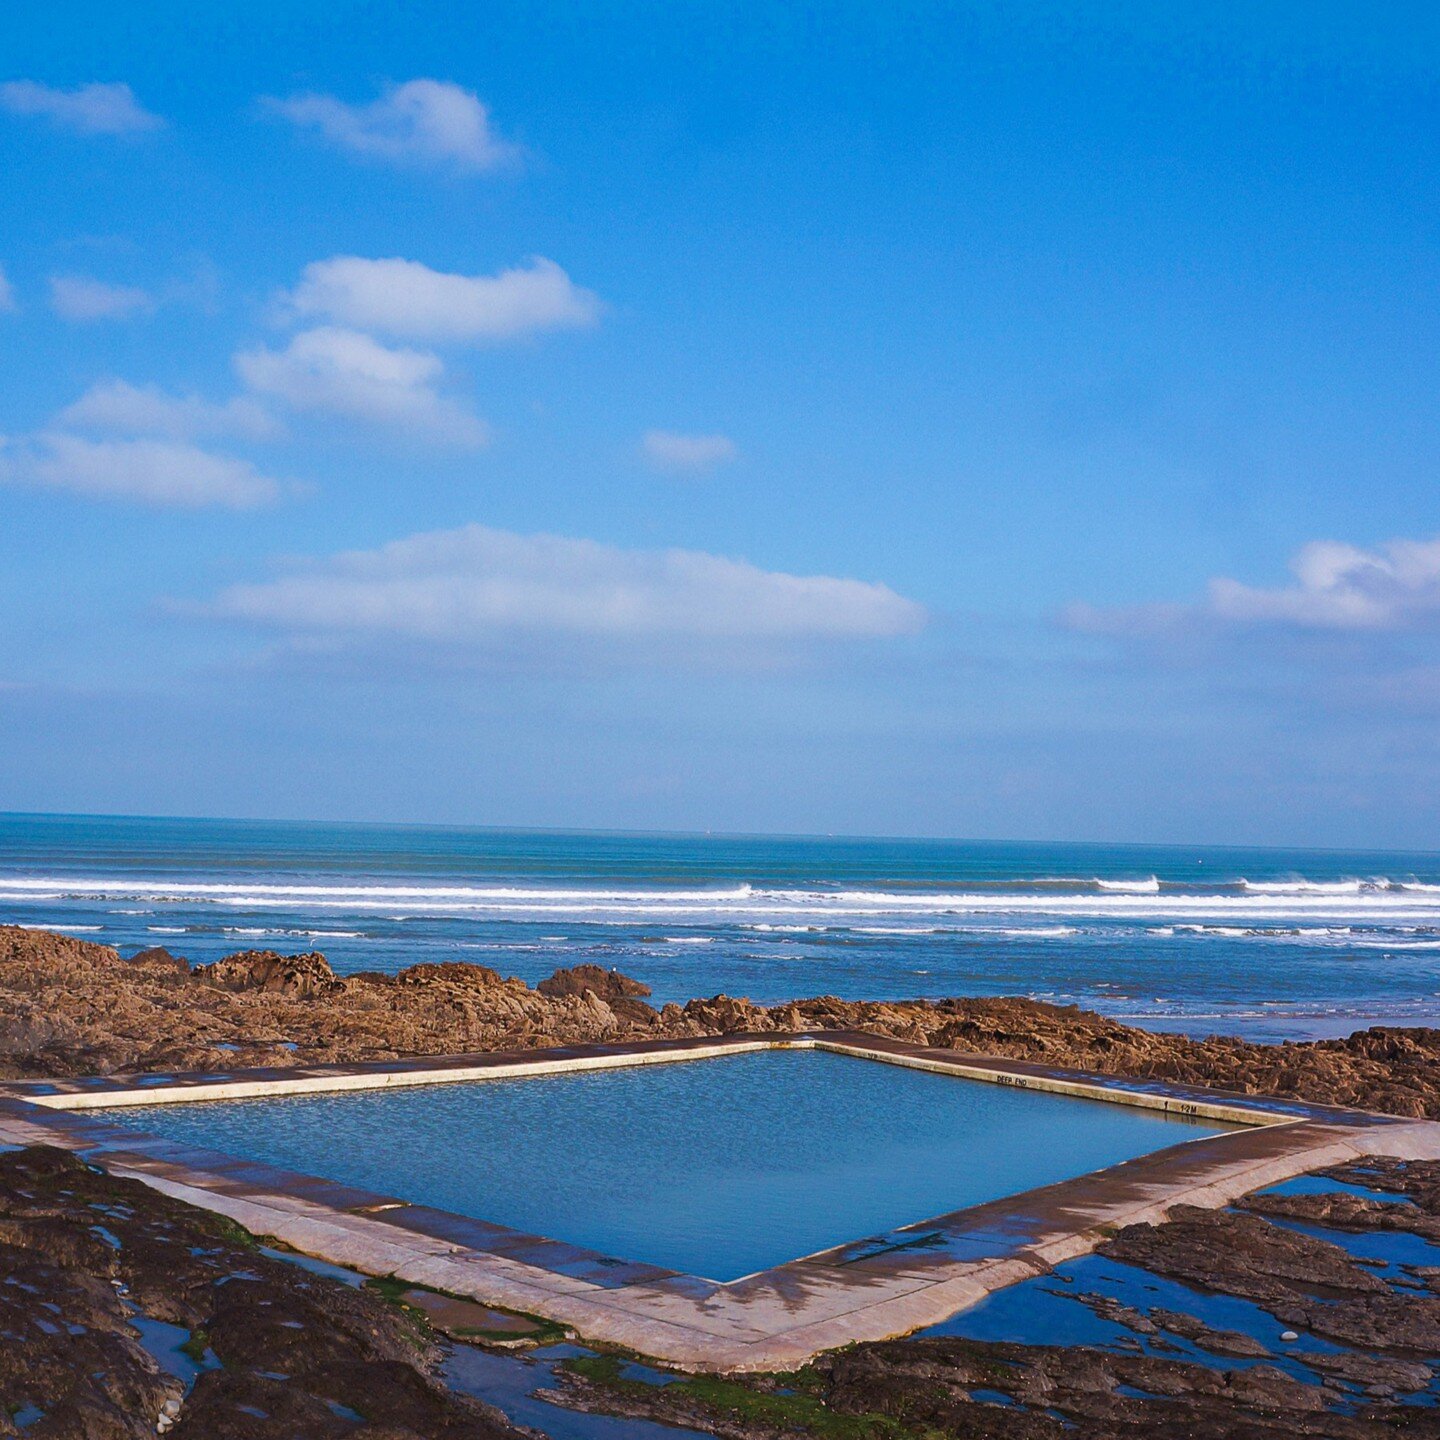 Sunny days in Westward Ho! We've been really enjoying the sun lately, it feels like summer is well and truly on its way. Here's the sea pool sitting pretty infront of some beautiful waves just a short walk from our surf school. Why not try it out pos